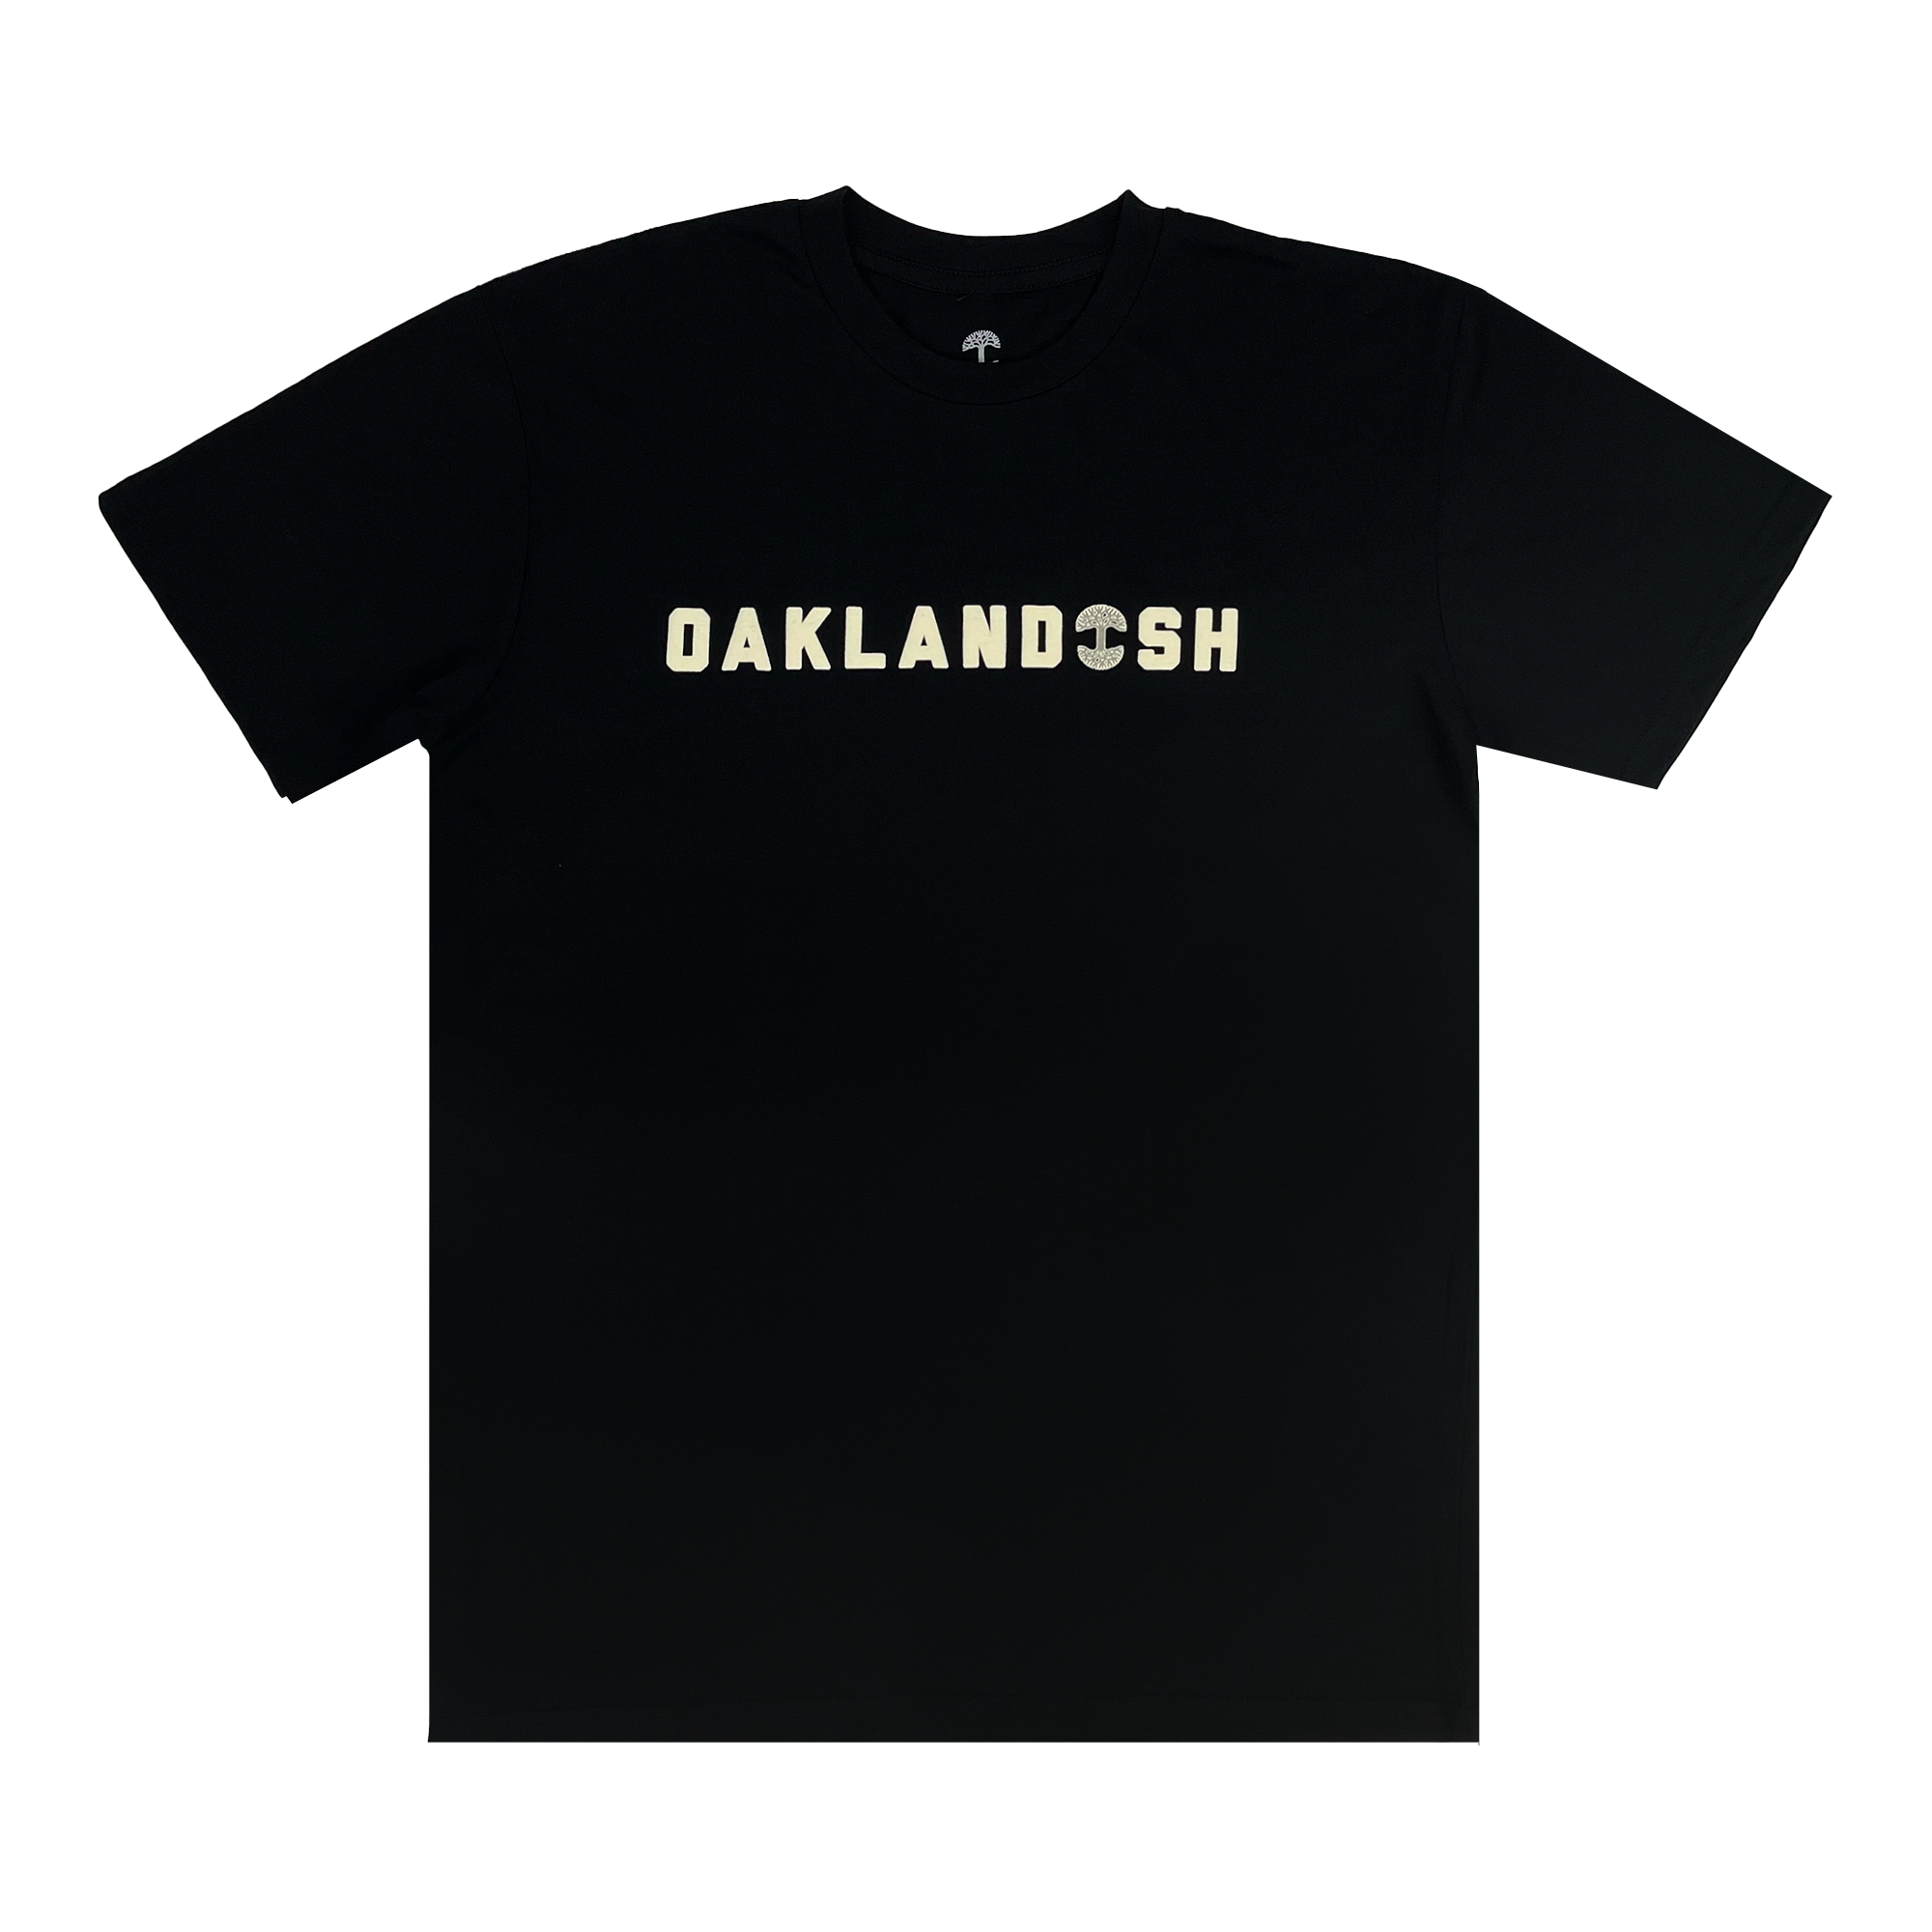 Cotton black t-shirt with Oaklandish Wordmark and Oaklandish tree logo in place of 'i'.